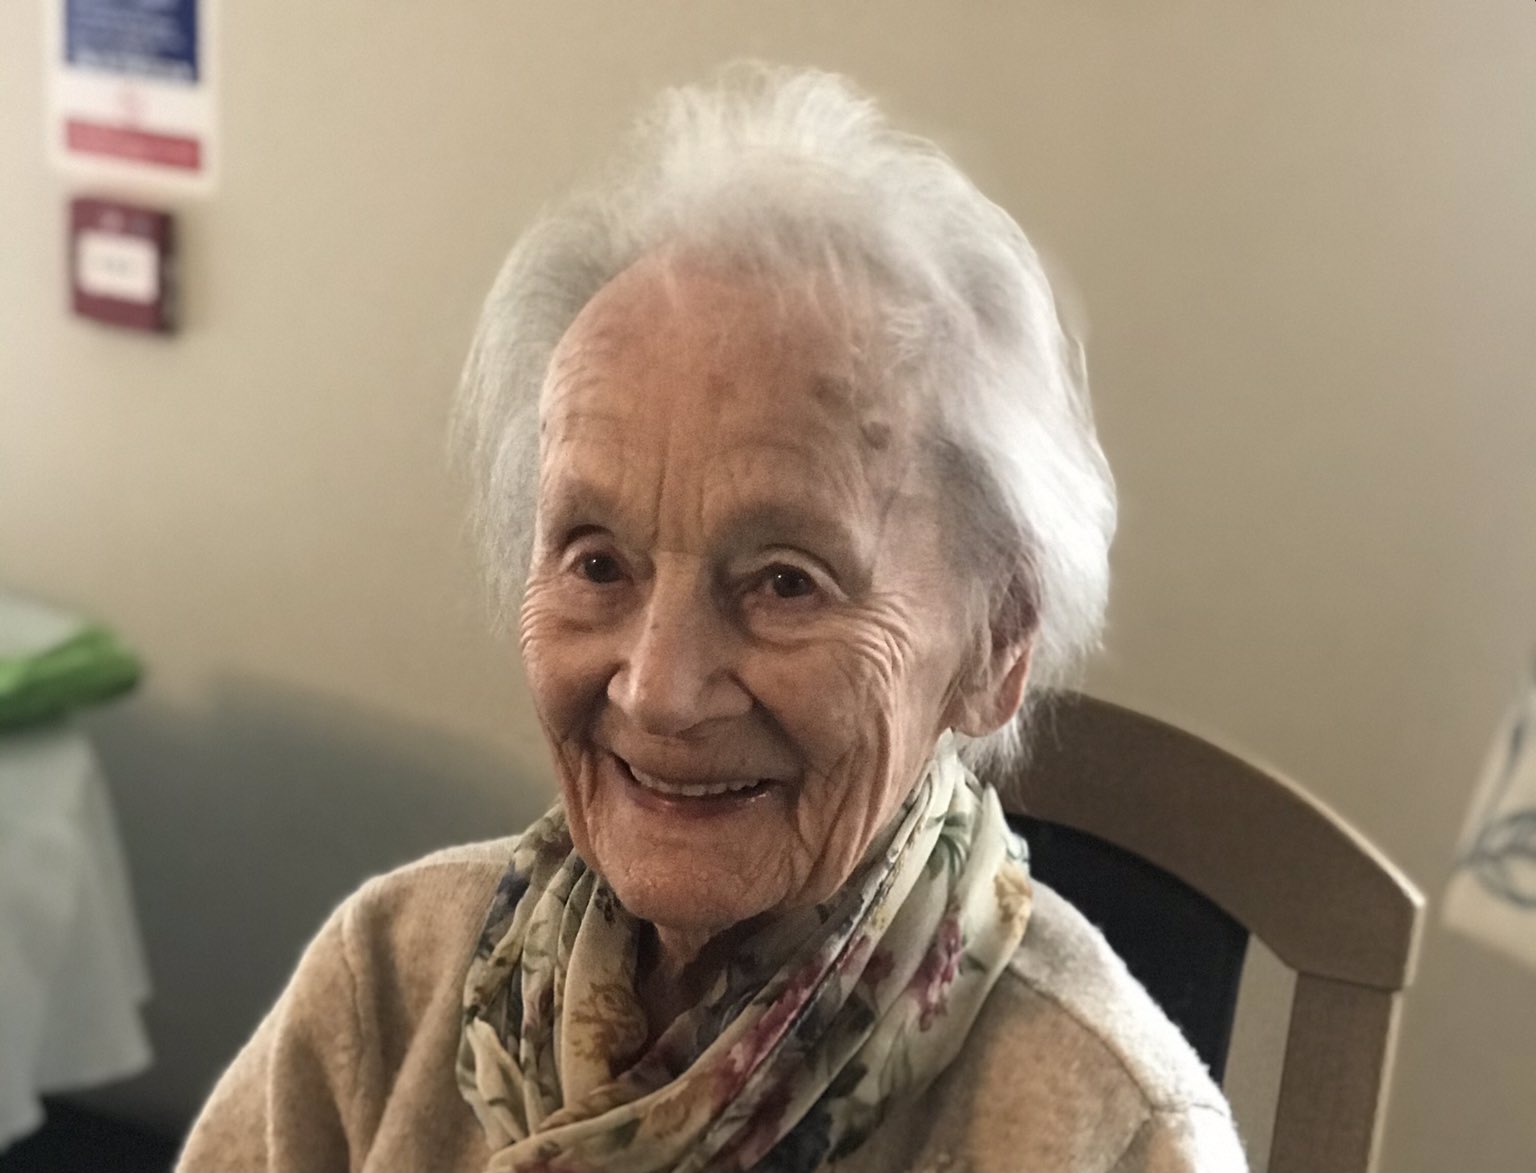 NEWS | Two world wars and now a pandemic – 105-year-old Kay delighted to receive COVID-19 vaccine